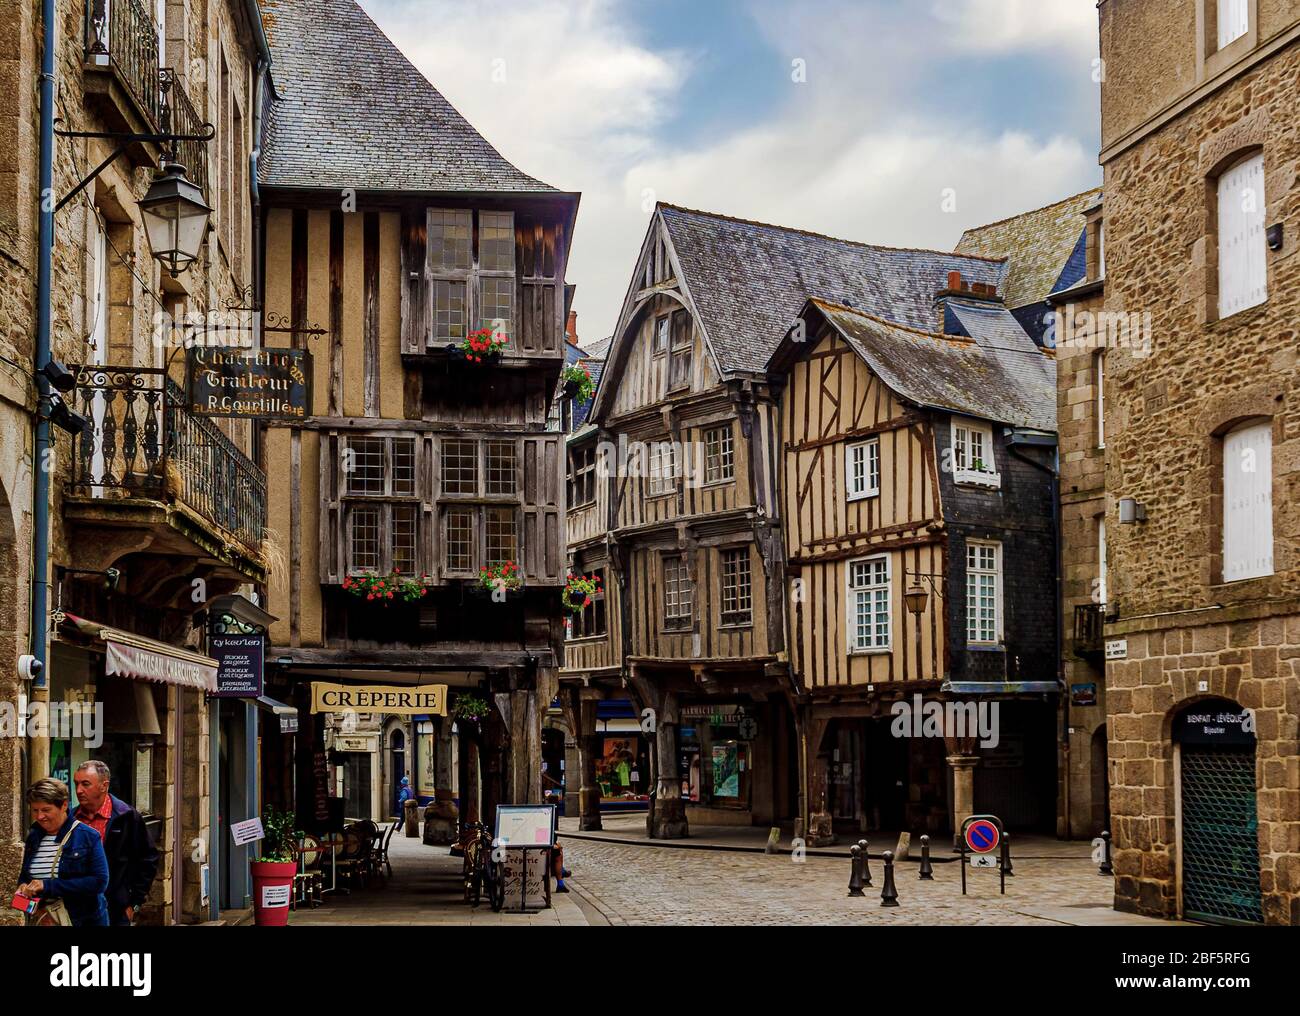 Dinan, Brittany, France - 31 May 2018: Old house on medieval street of Rue de Jerzual in Dinan, Brittany, France. Stock Photo